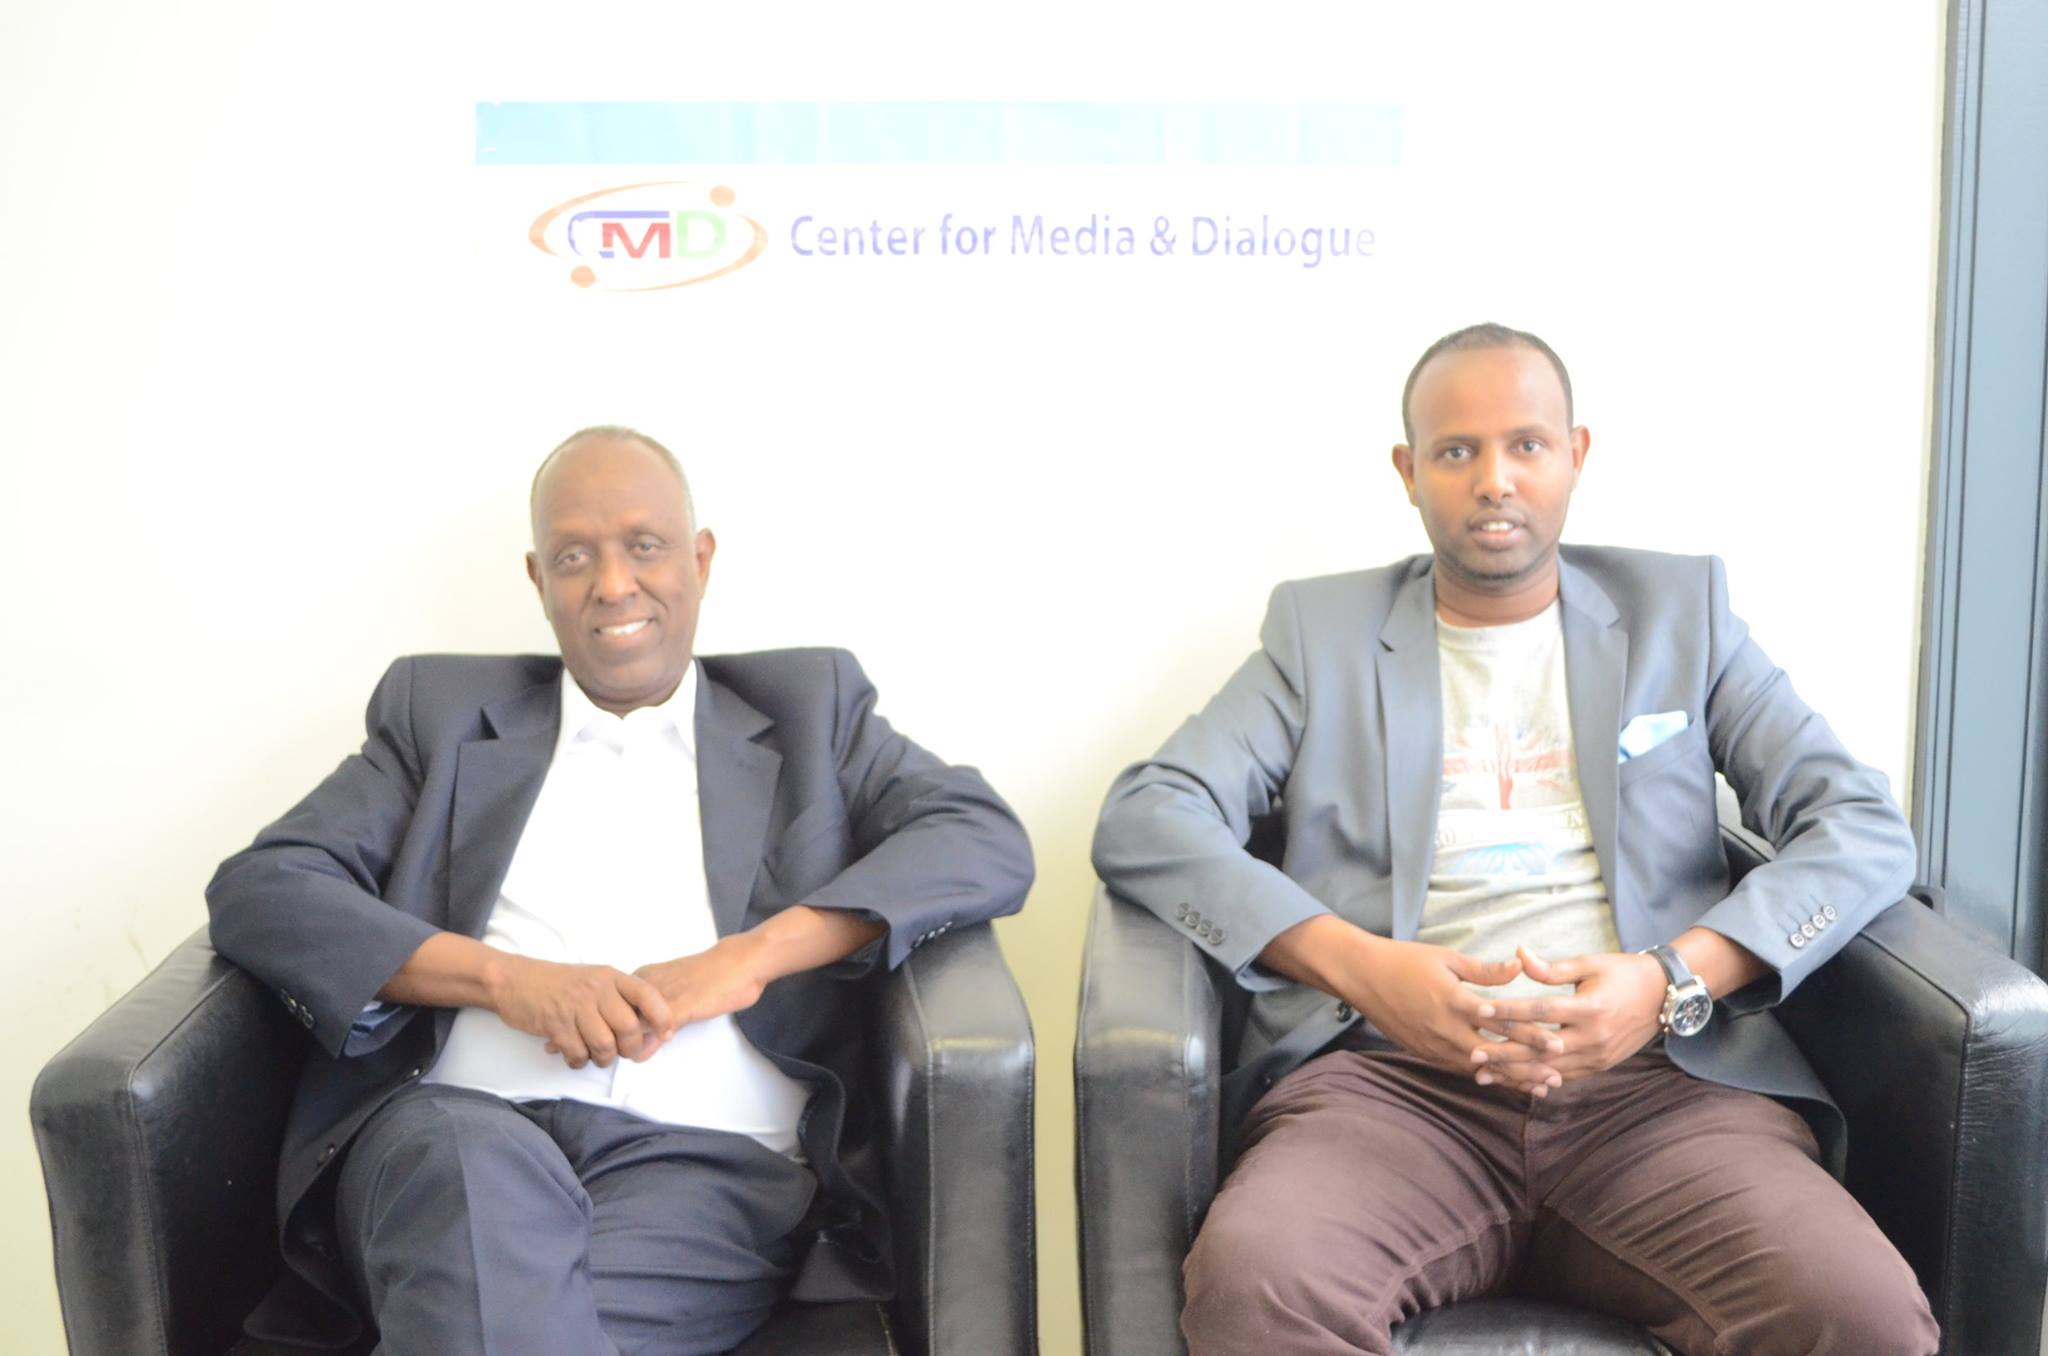 CONFERENCE ON THE ROLE OF MEDIA IN  PEACE BUILDING AND SOMALI’s VISION 2016 WARSOW, POLAND  -07 -10  SEPTEMBER 2015